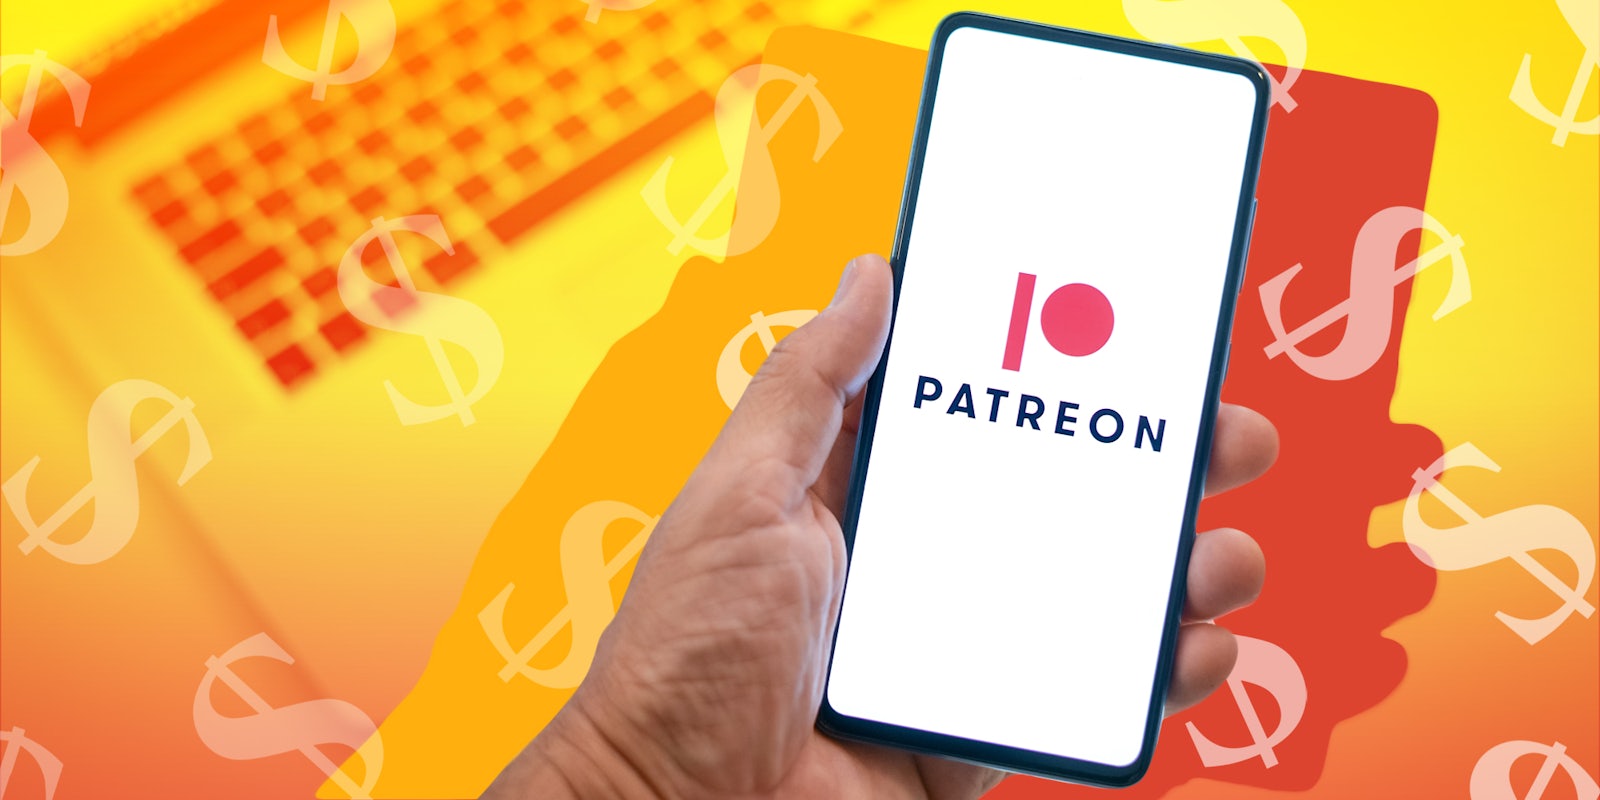 hand holding phone with Patreon on screen in front of laptop background with yellow to red vertical gradient money symbol overlay Passionfruit Remix